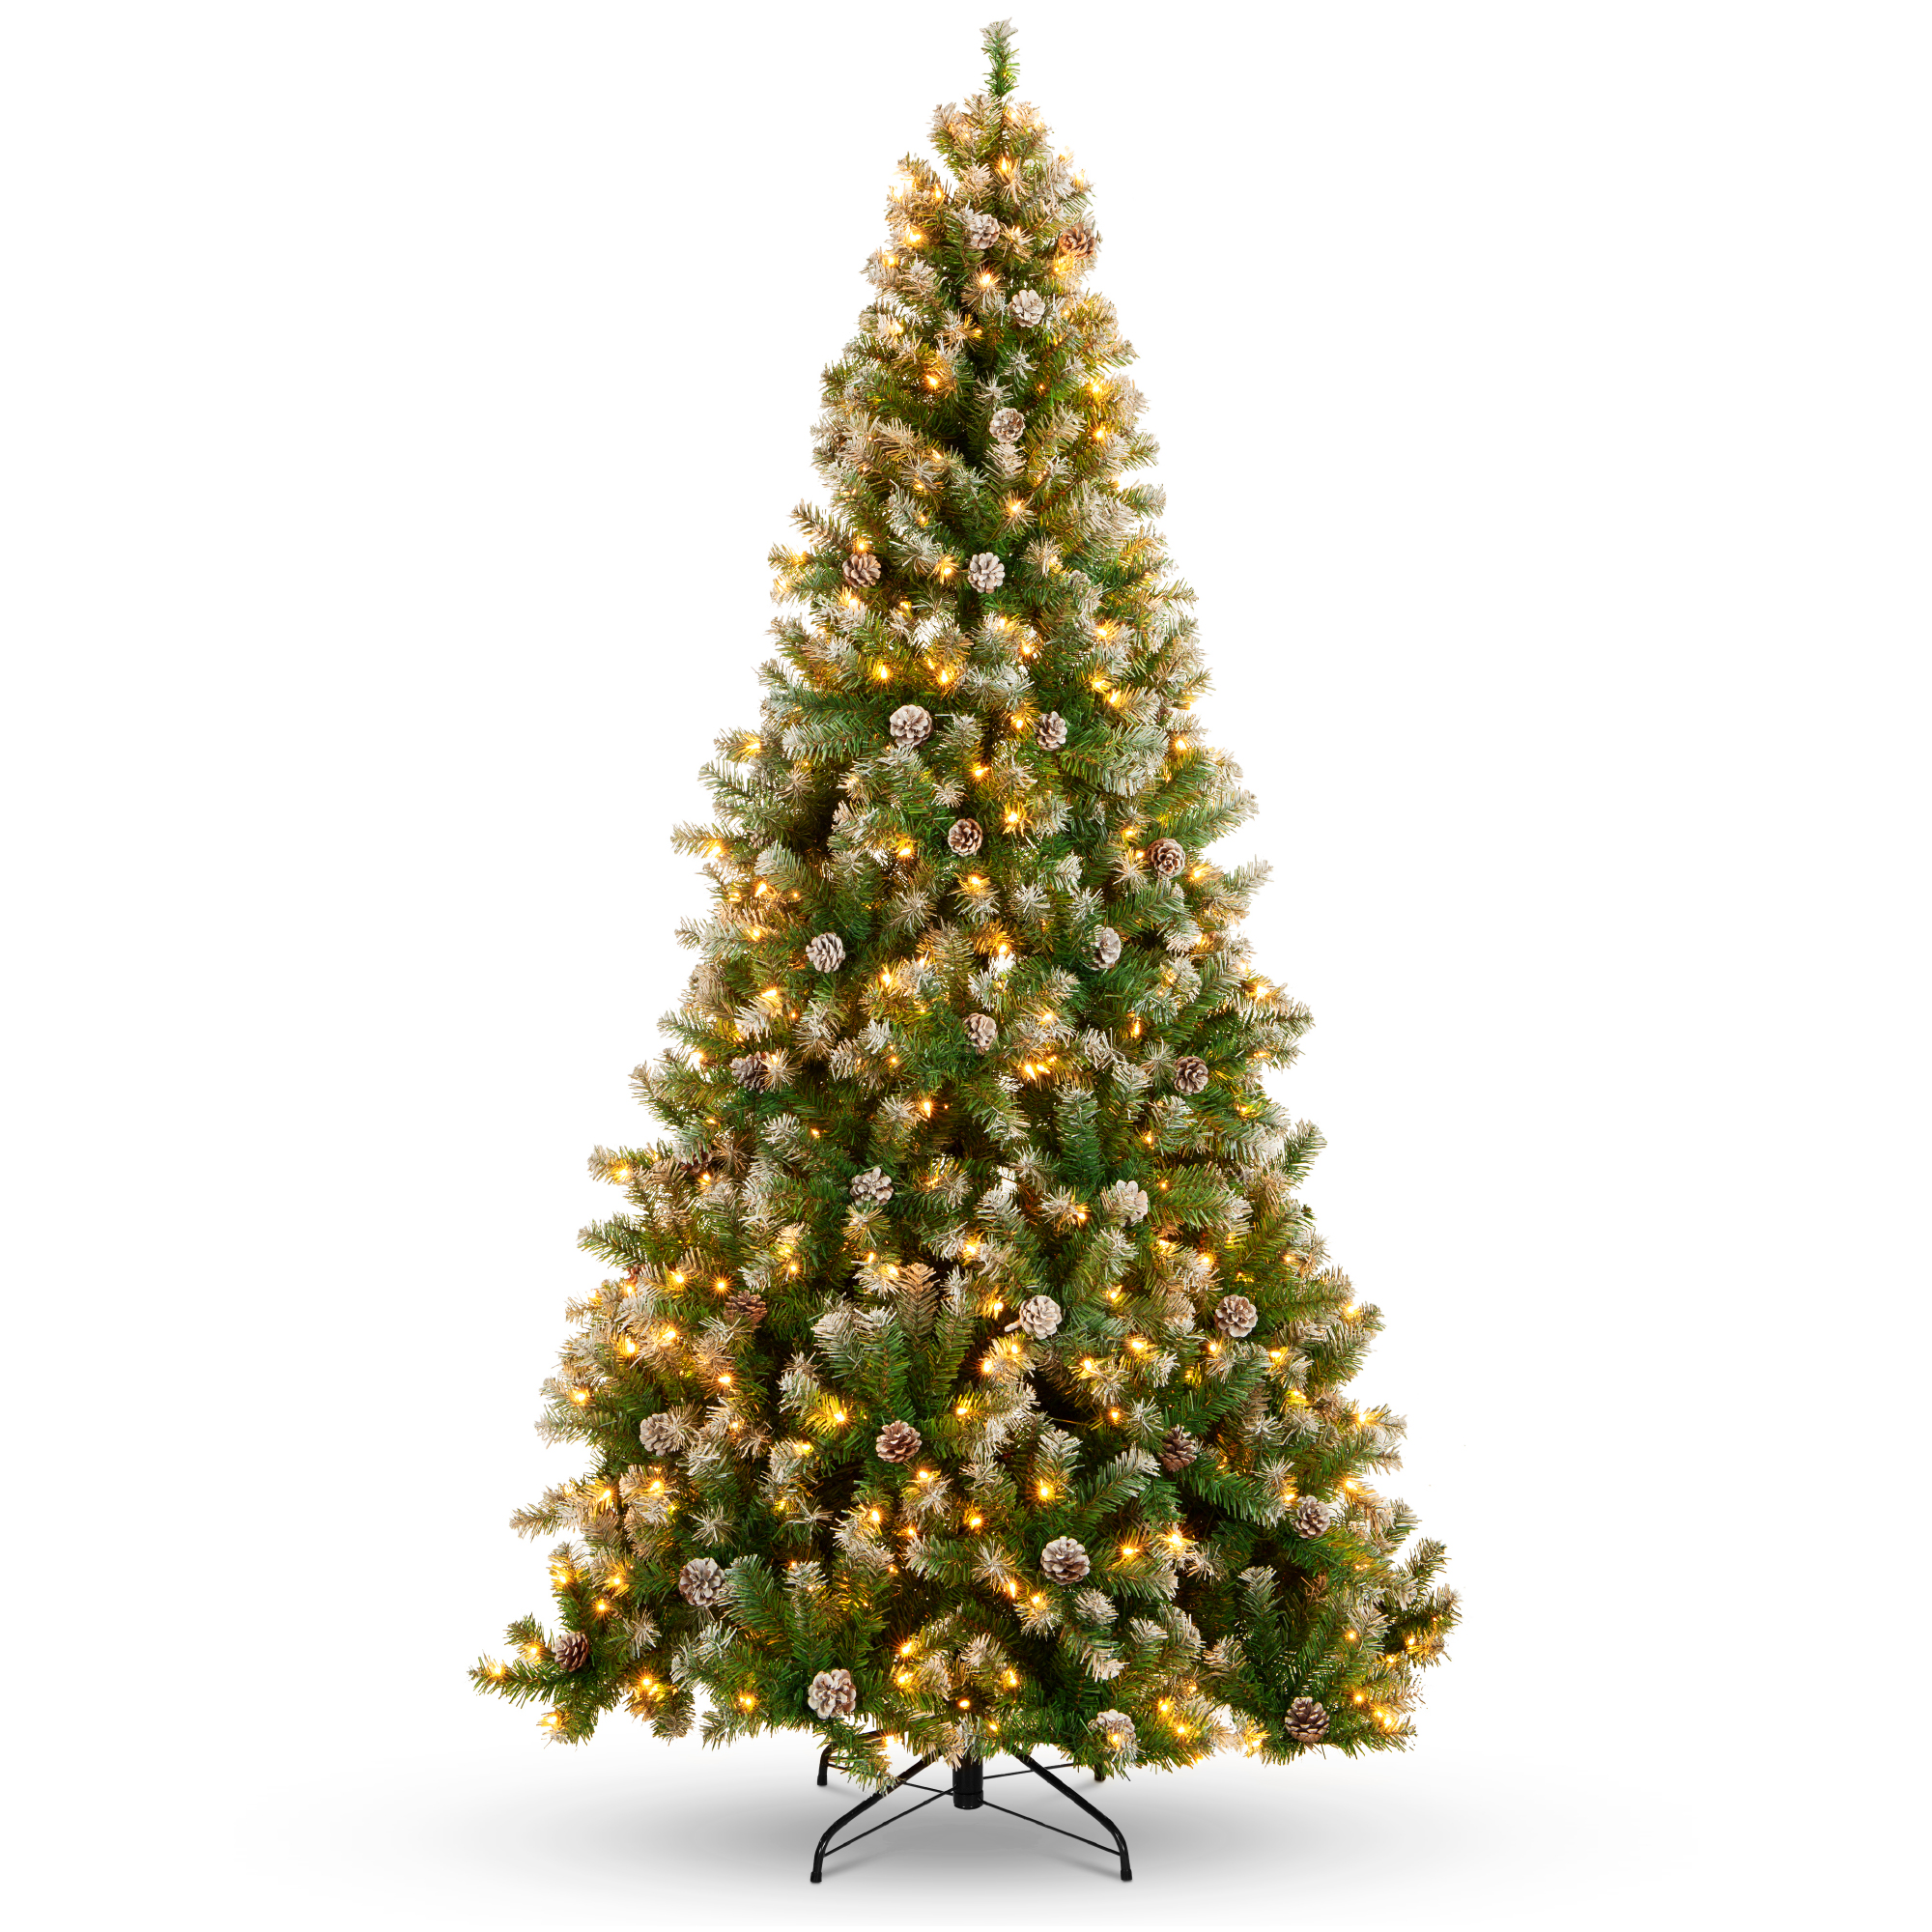 Best Choice Products 6ft Pre-Lit Pre-Decorated Holiday Christmas Tree w/ 1,000 Flocked Tips, 250 Lights, Metal Base - image 1 of 7